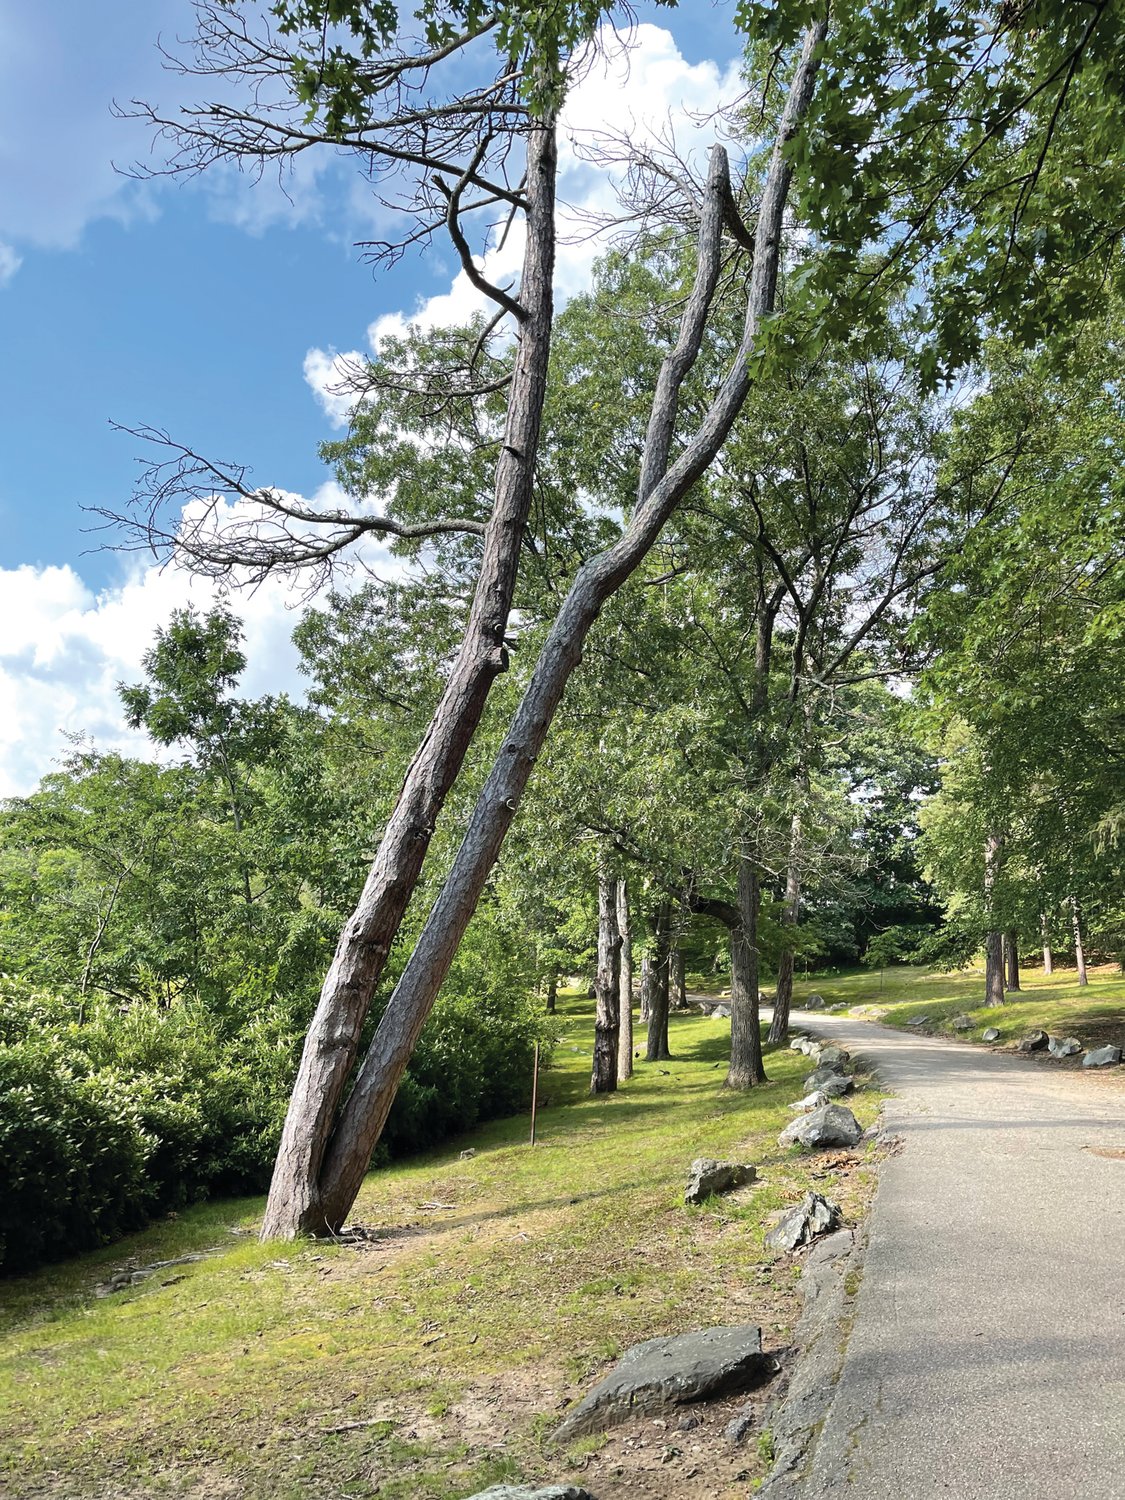 HANGING OVER: This tree is among several along the loop at Meshanticut Park that appeared sick or dead earlier this summer.